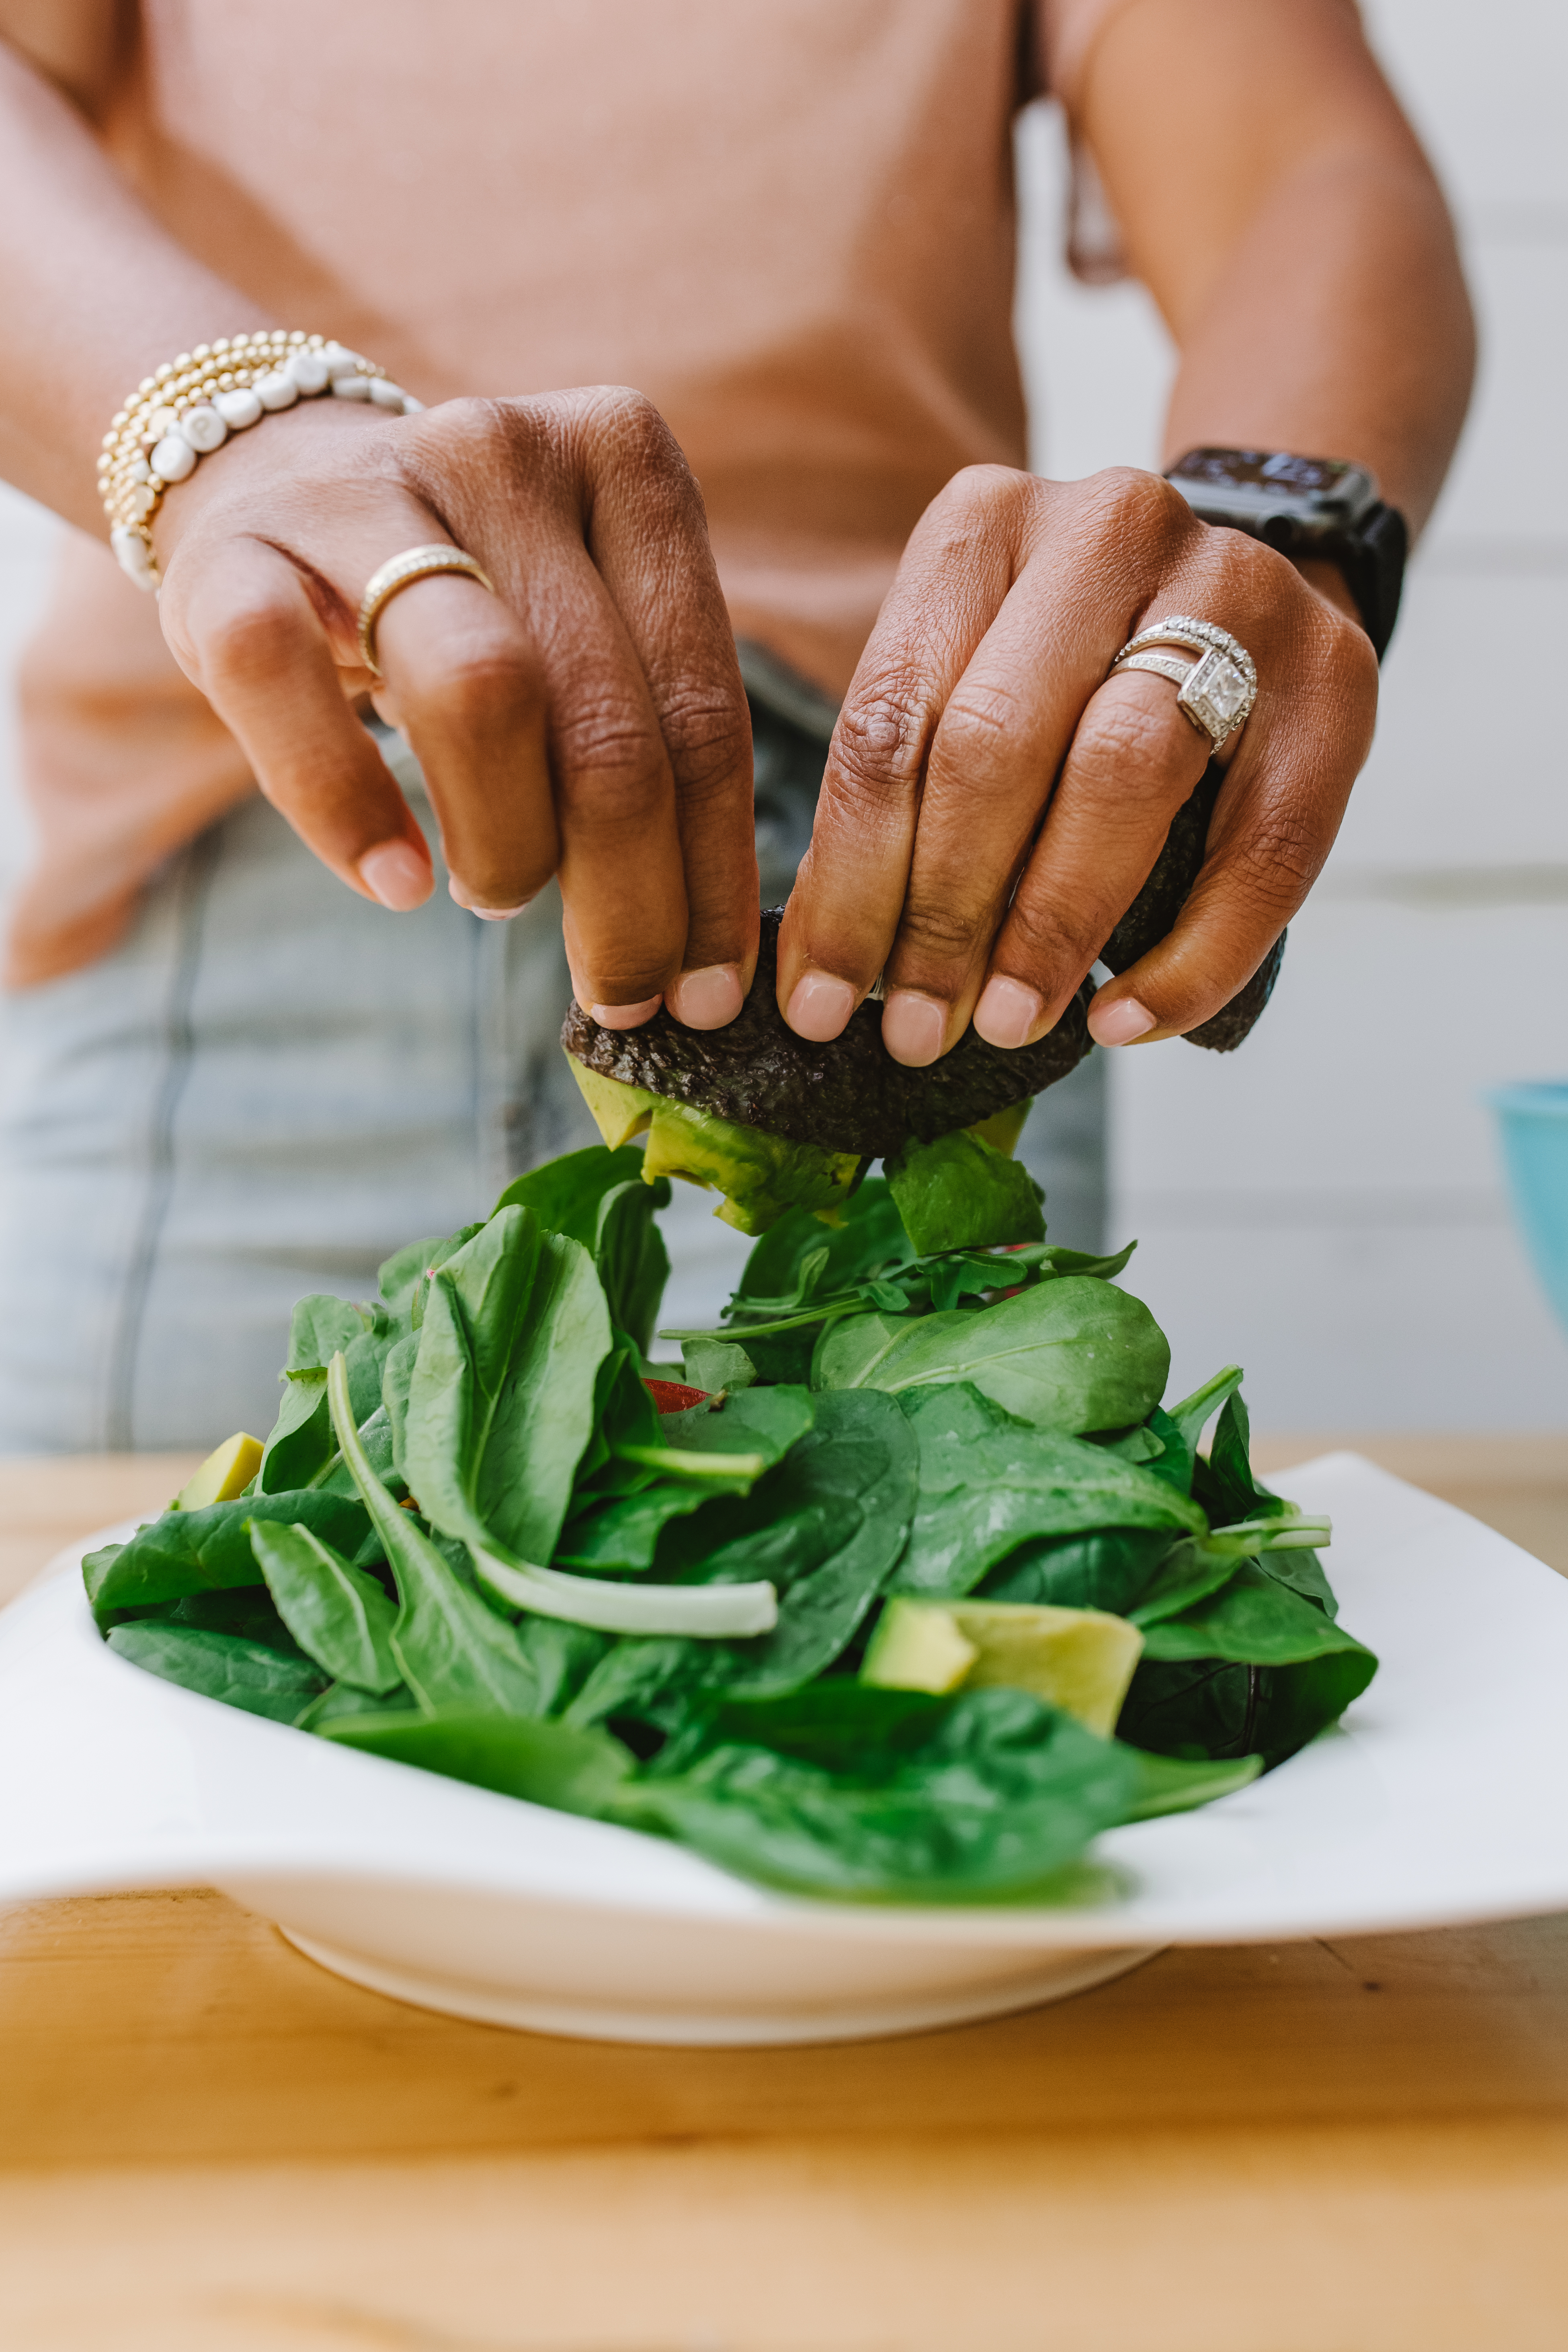 Woman wearing rings squeezing avocado on to a green salad on a white plate, on a wood counter.